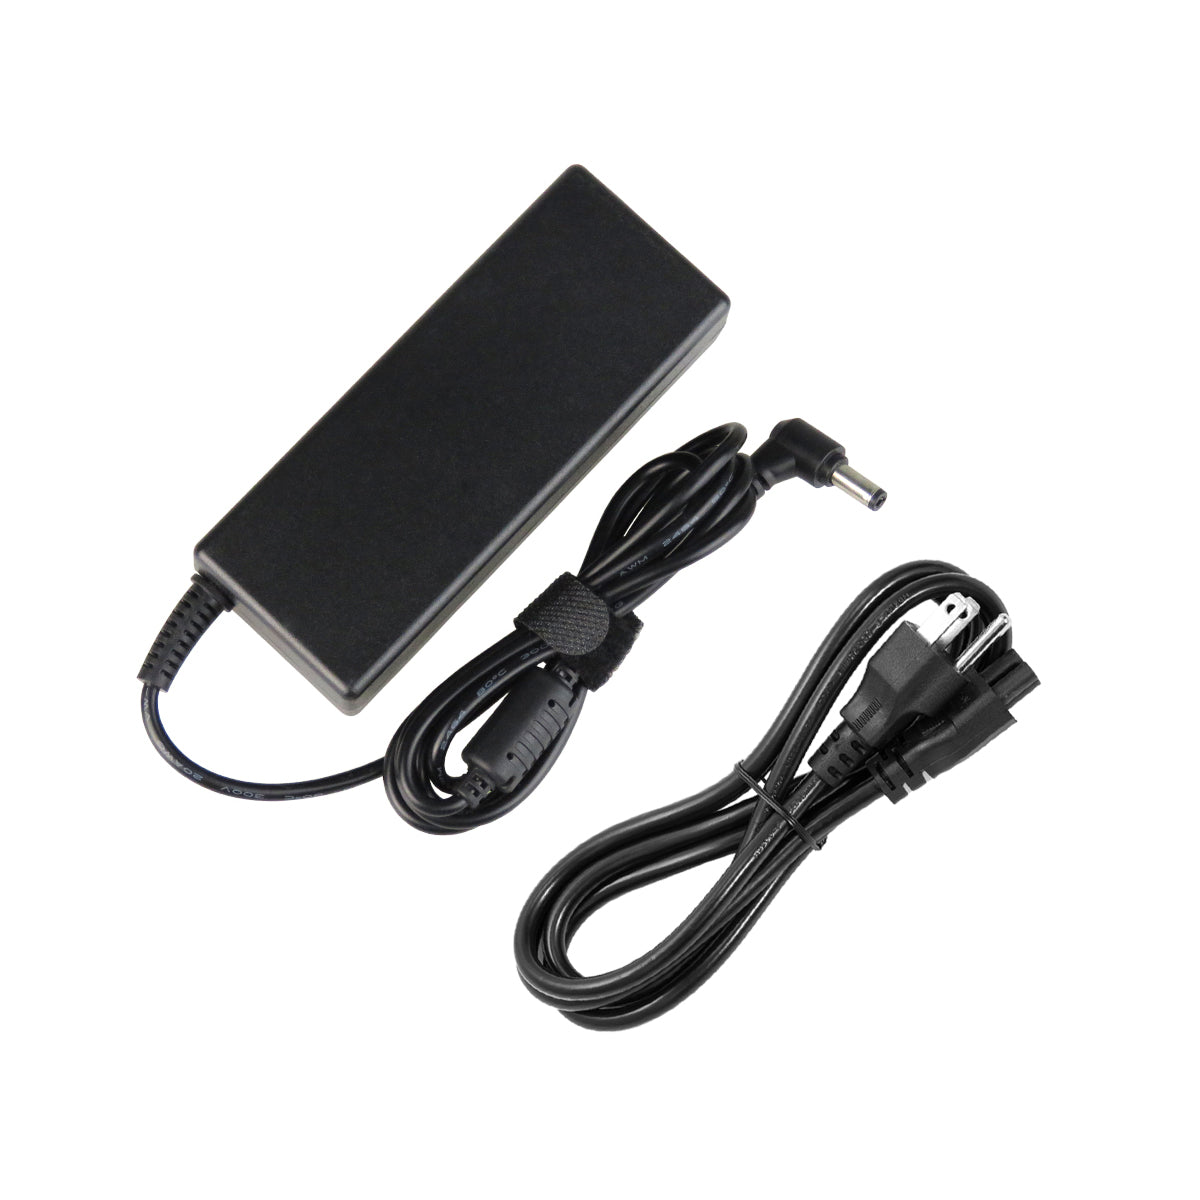 AC Adapter Charger for ASUS X80LE Notebook.